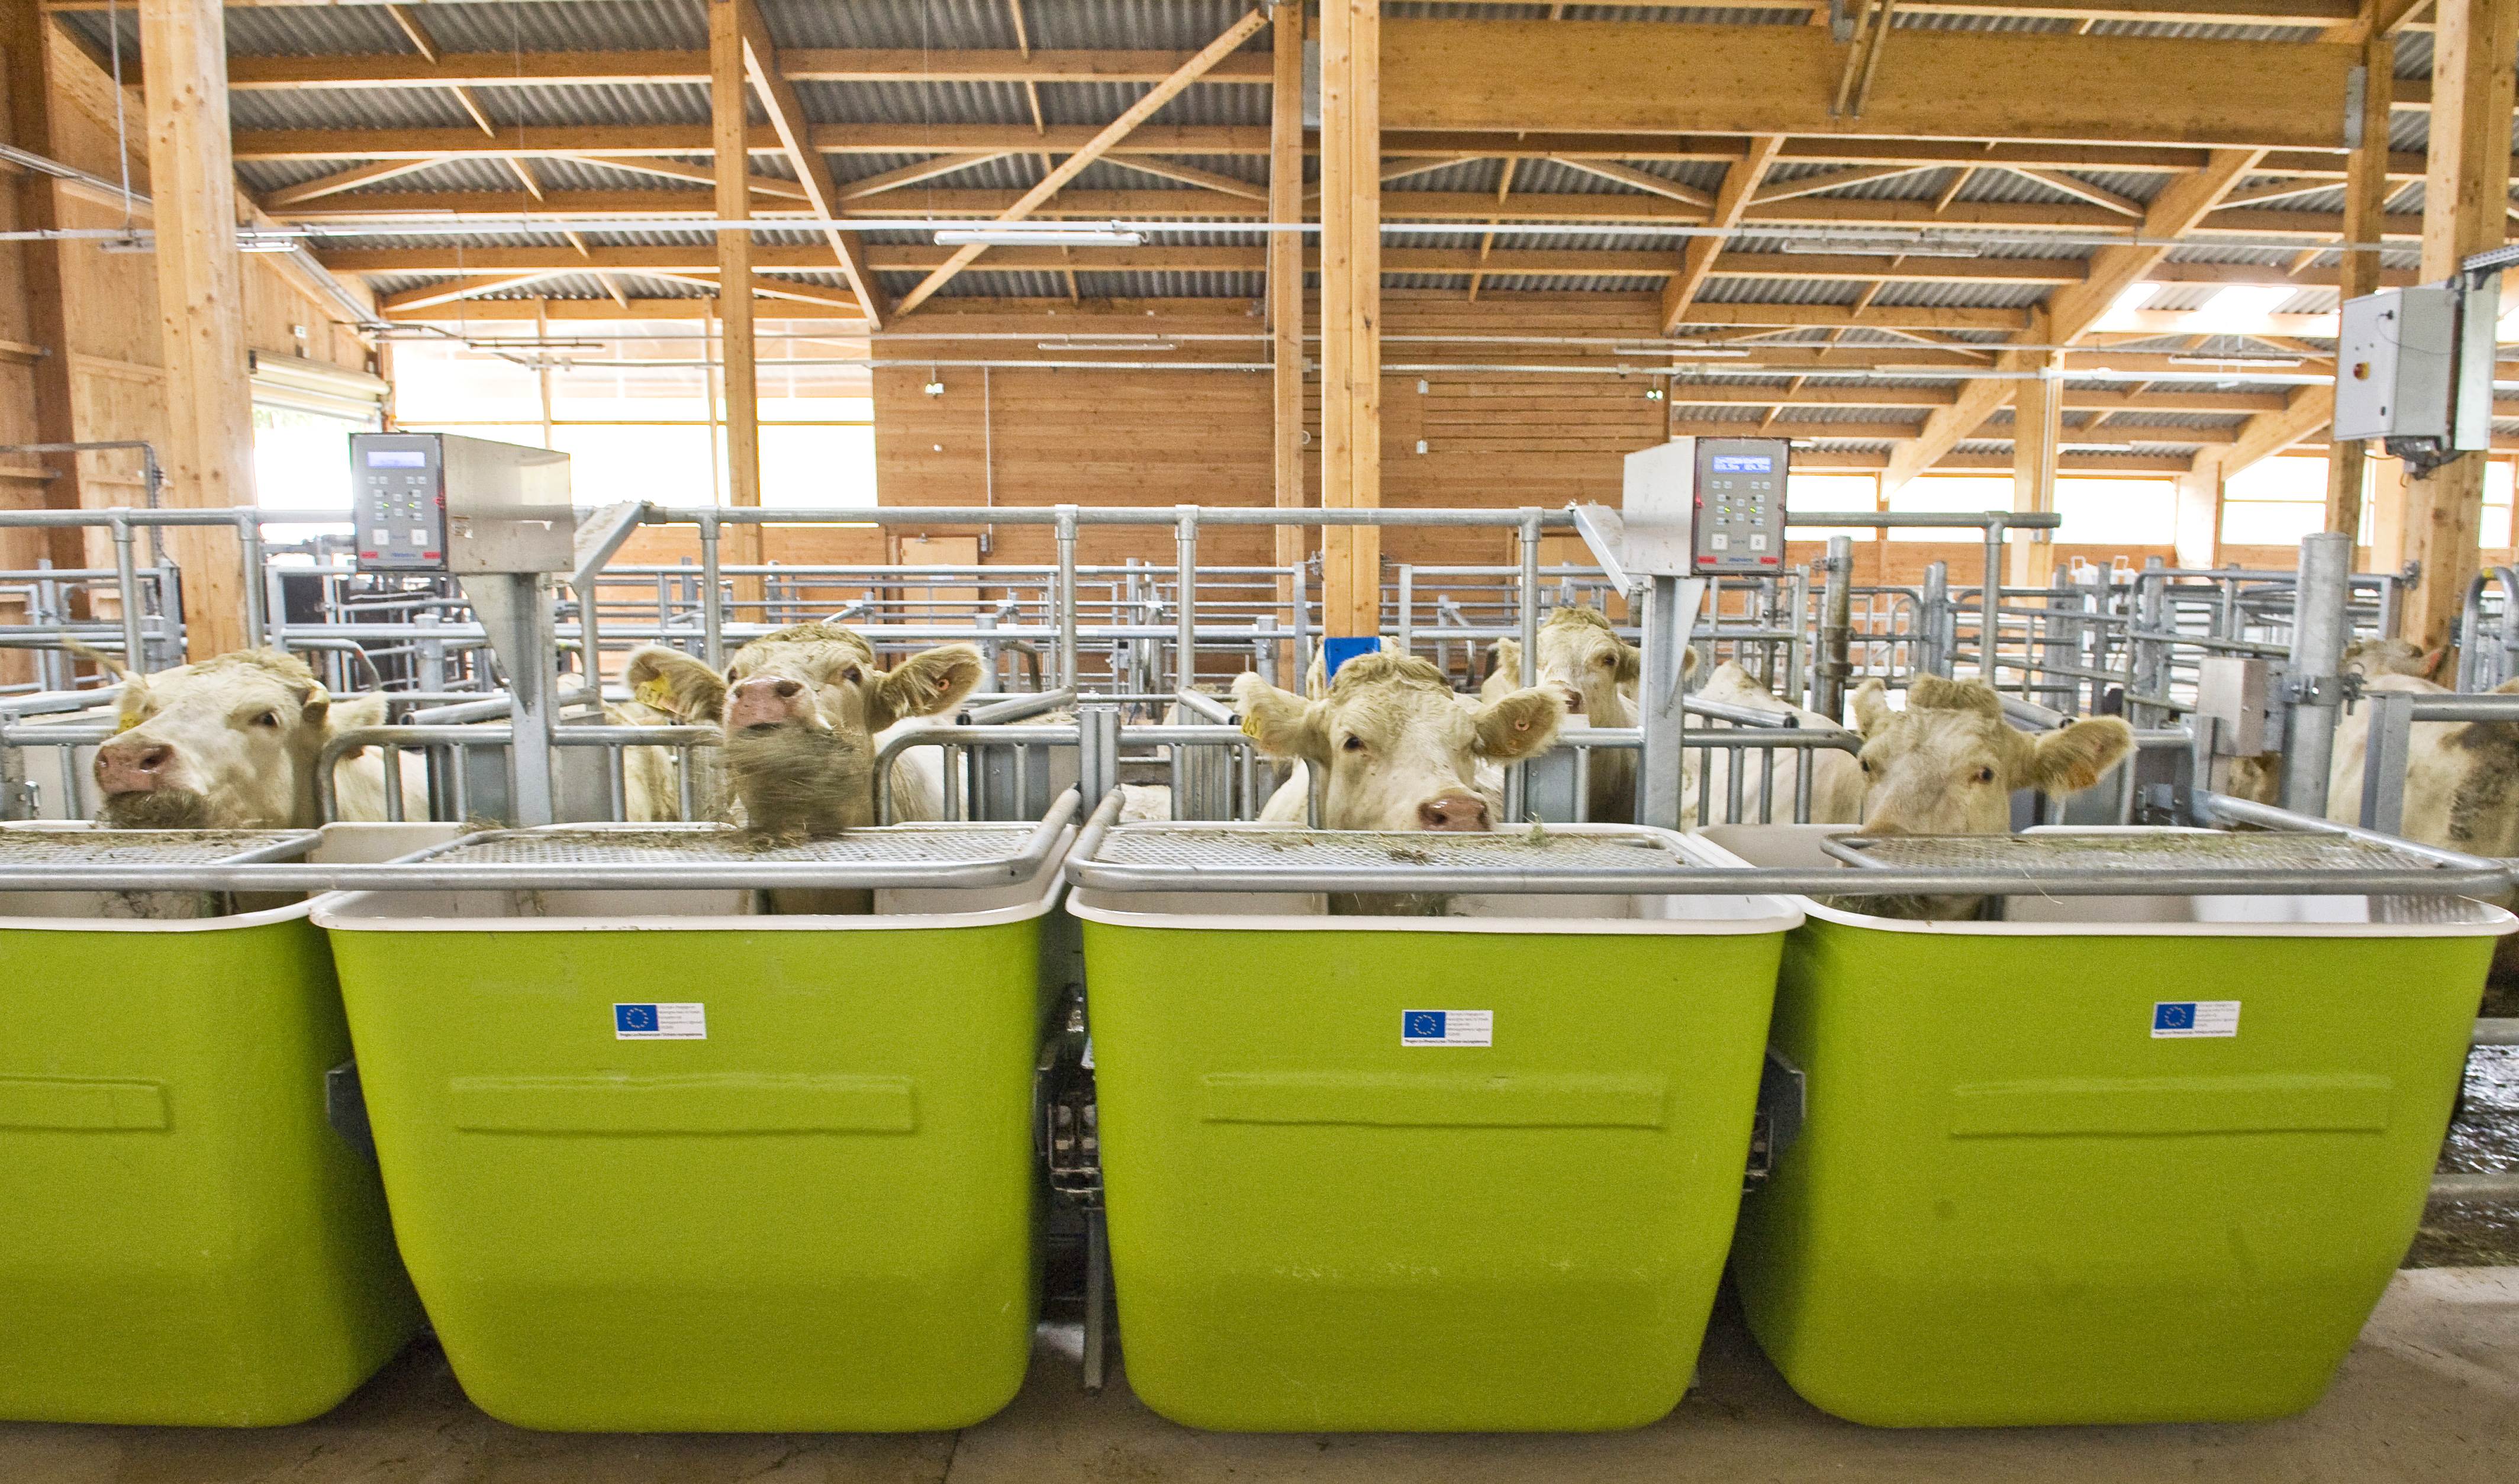 Cows eat in troughs which control the quantity of food ingested by each animal, in the new Herbipole research centre for the mountain farming of INRA (National Institute of Agricultural Research), during its inauguration in Laqueuille on September 16, 2015. AFP PHOTO / THIERRY ZOCCOLAN